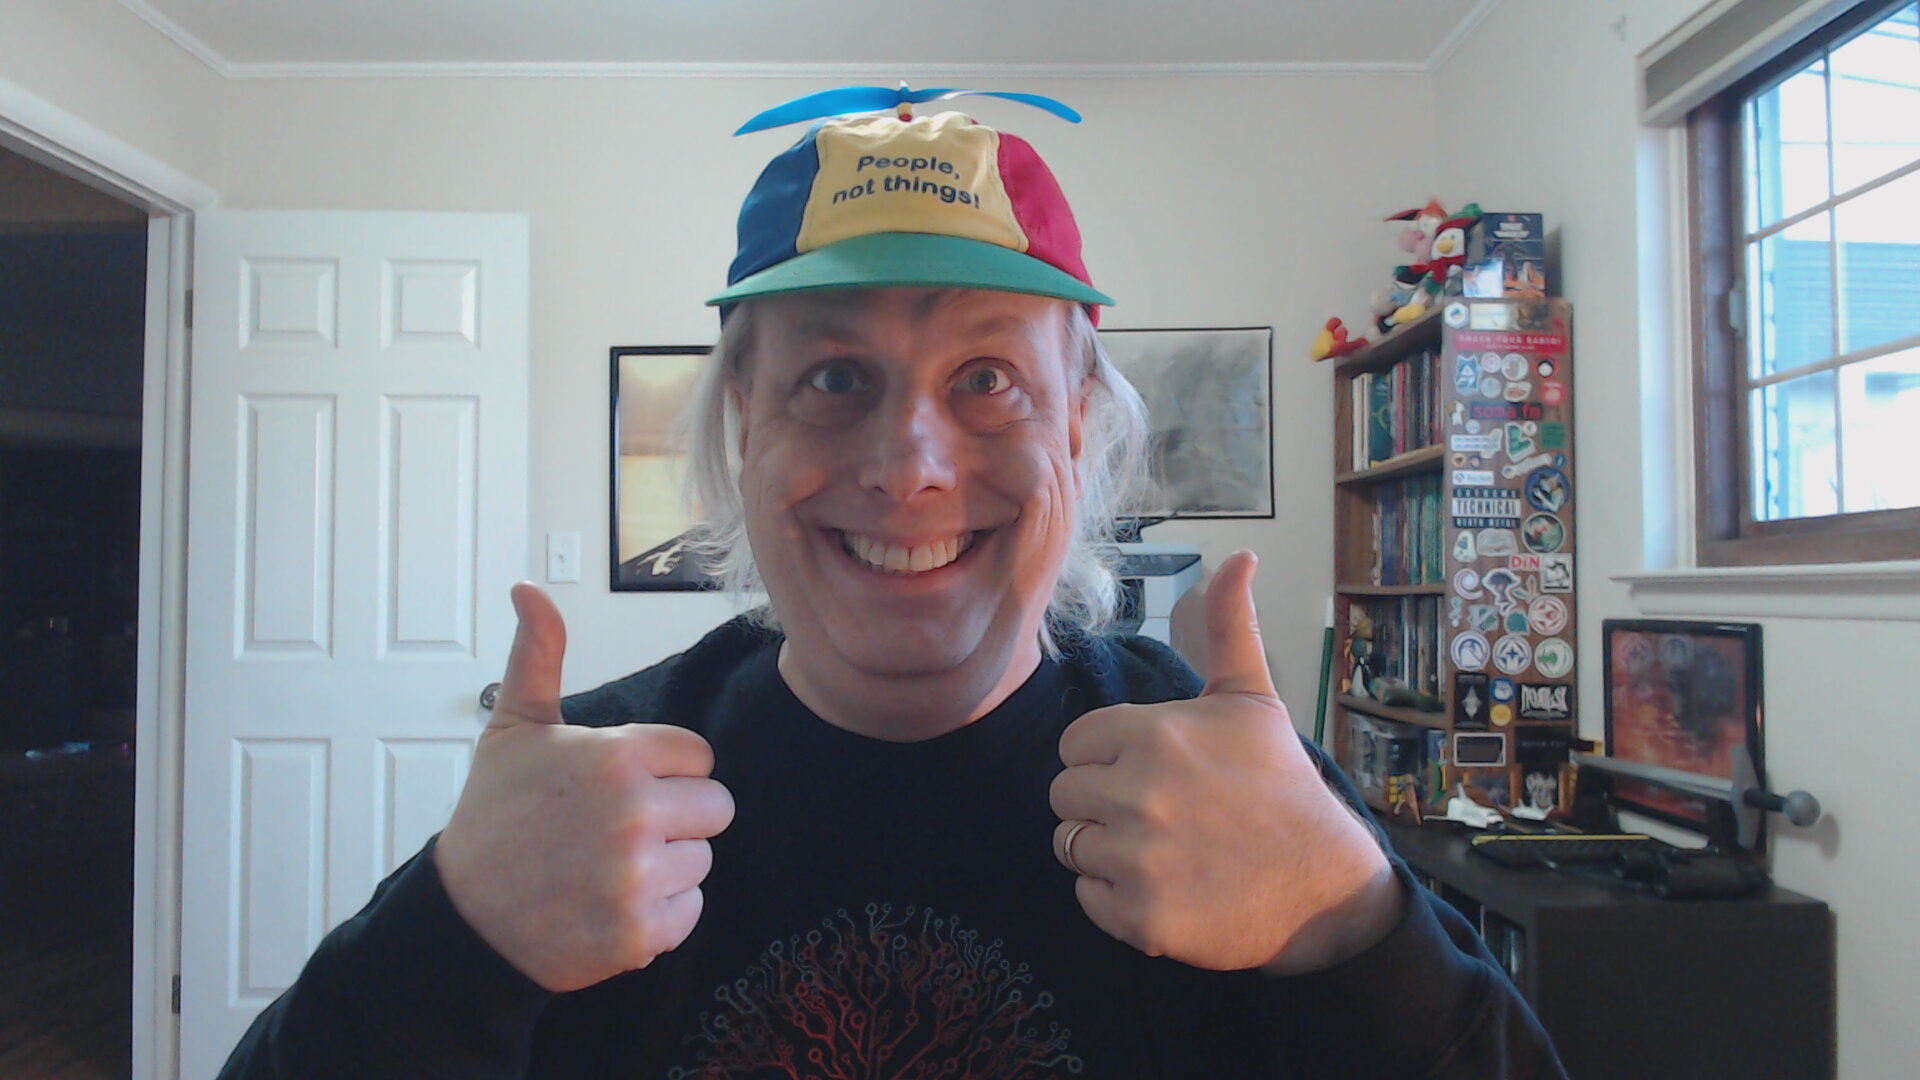 Me wearing a paneled baseball cap with different colors and a propeller on top that says 'People, not things!'